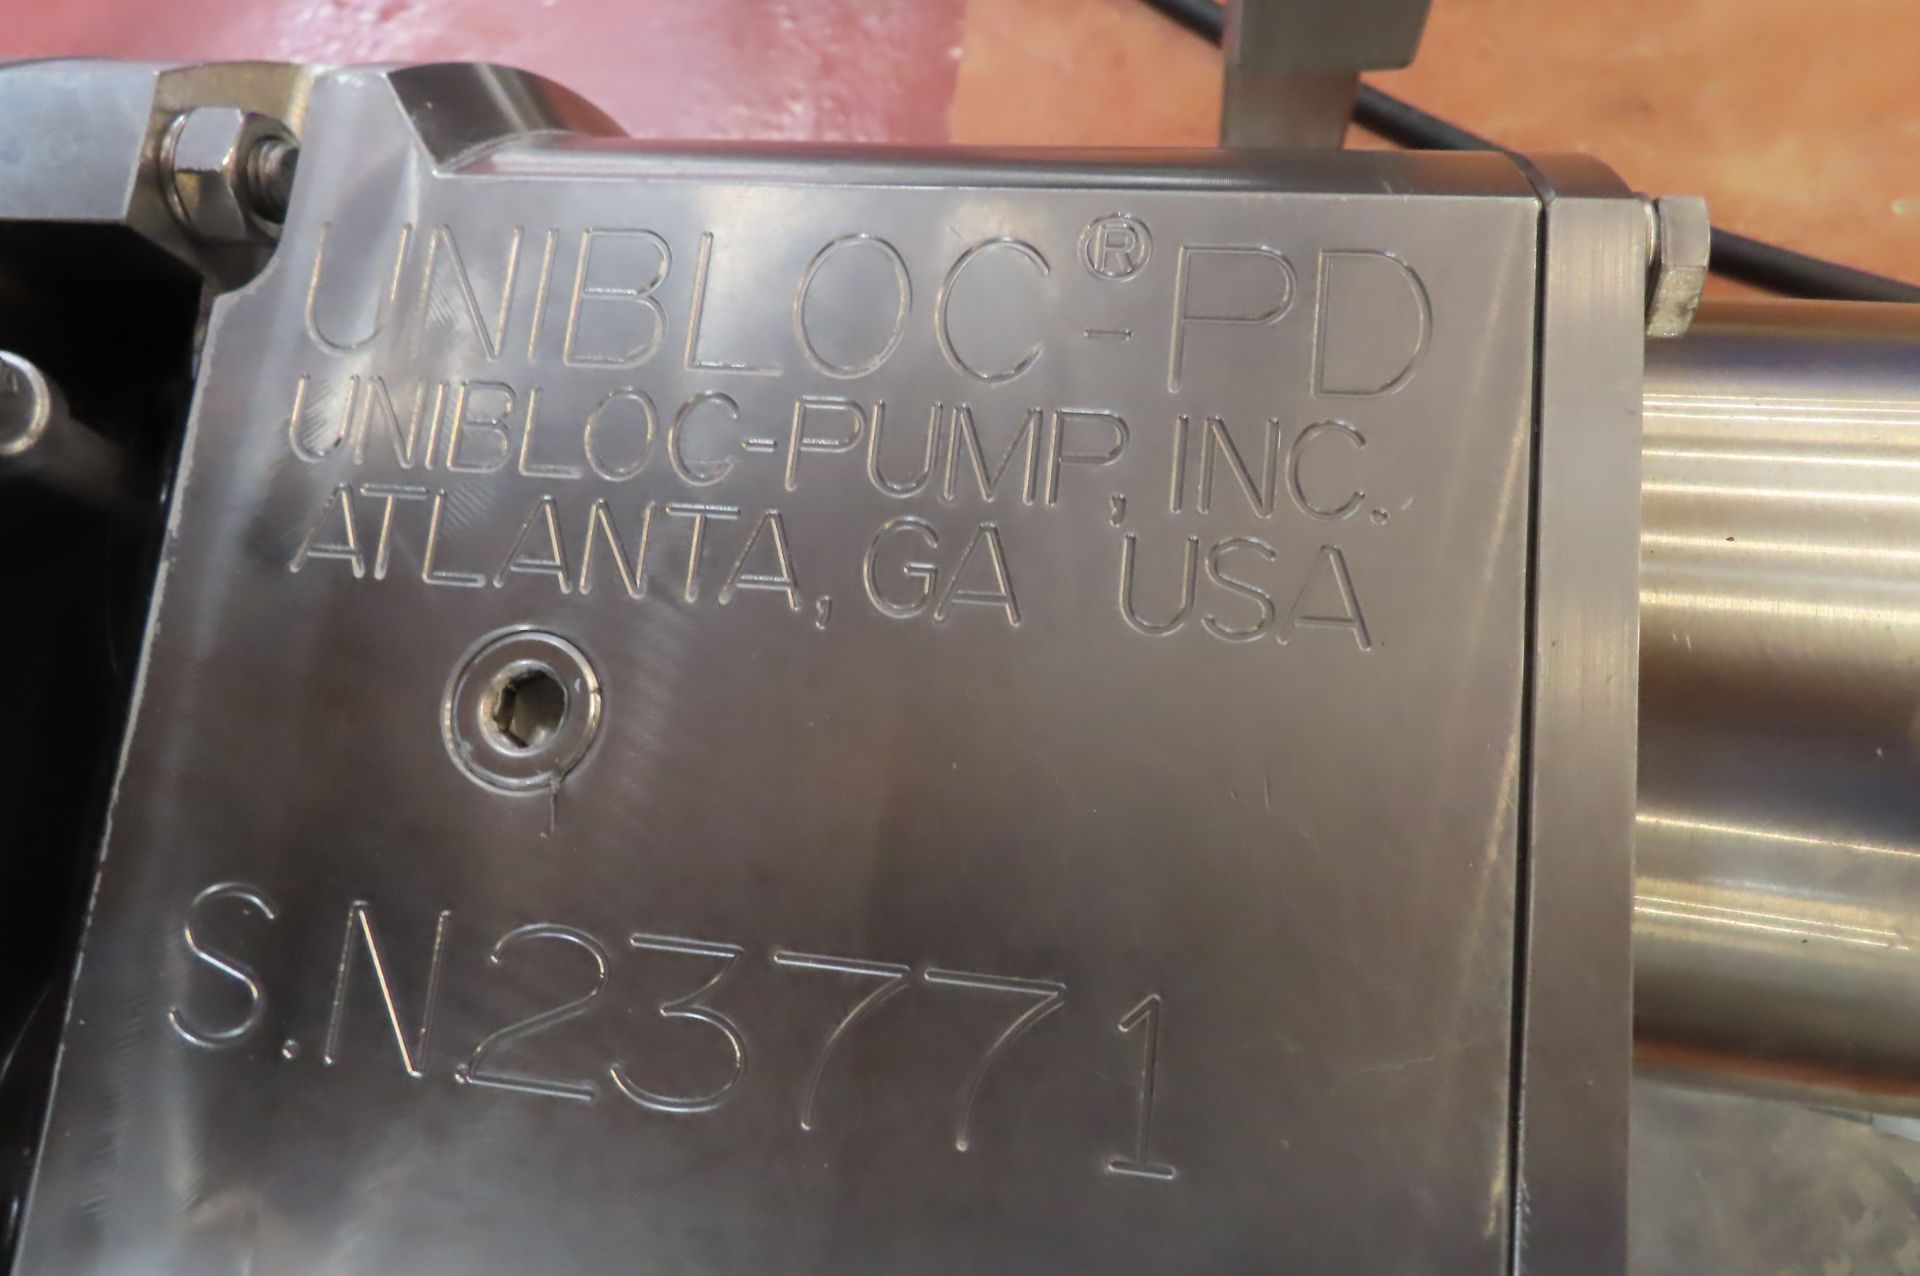 UNIBLOC CESSWDM3613T STAINLESS STEEL SHEAR PUMP, S/N 23771 - Image 2 of 5